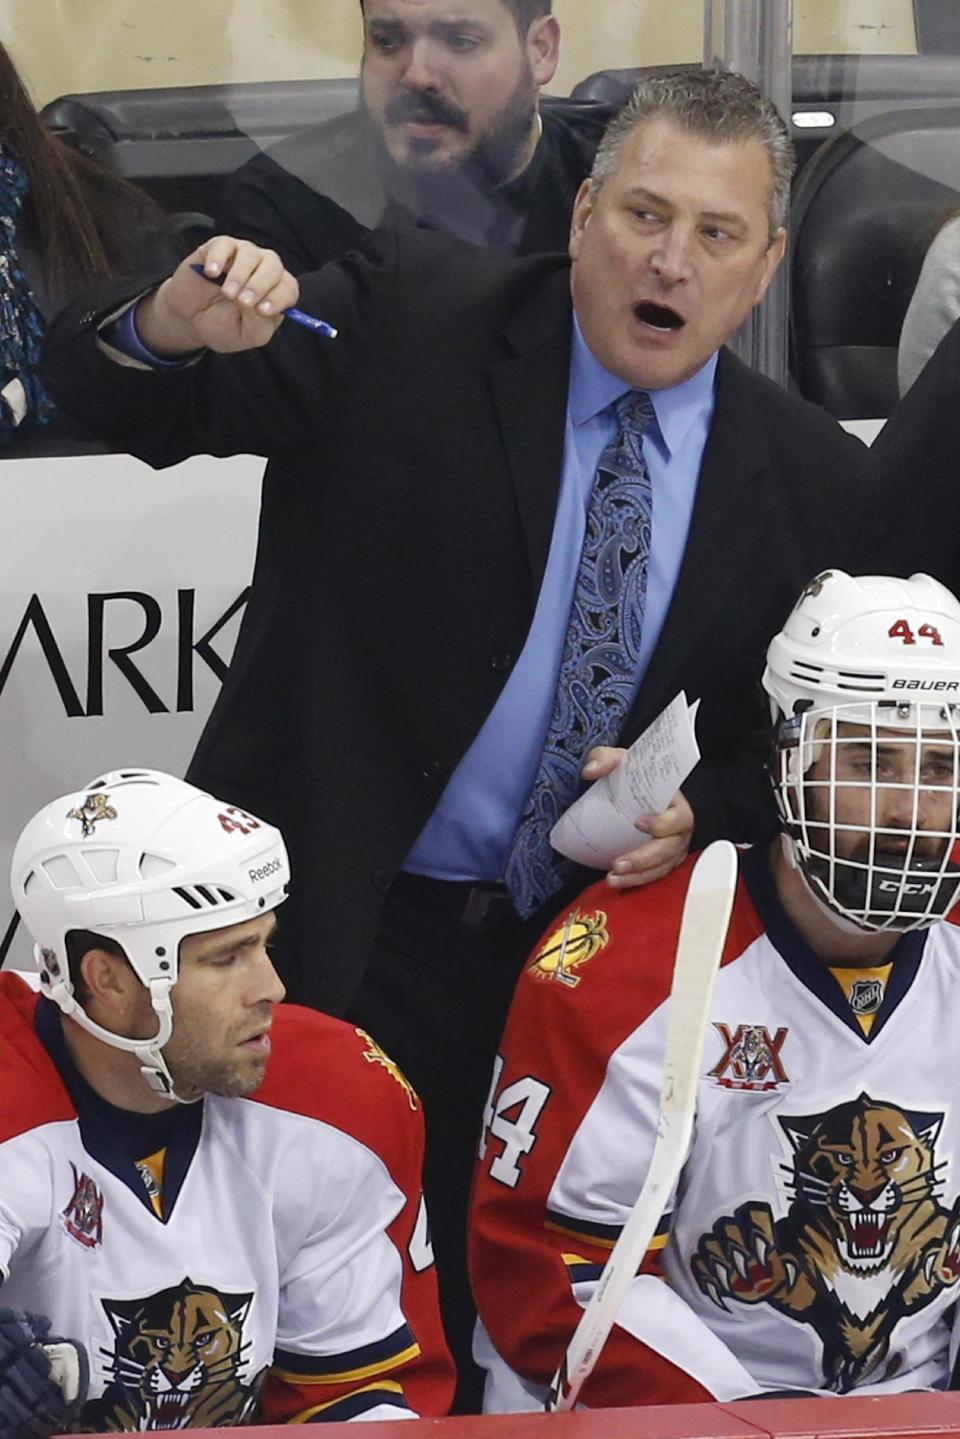 FILE - In this Jan. 20, 2014, file photo, Florida Panthers head coach Peter Horachek gives instructions during an NHL hockey game between the Pittsburgh Penguins and the Panthers in Pittsburgh. The Panthers have parted ways with Horachek, said Panthers general manager Dale Tallon, Tuesday, April 29, 2014, saying the dismissal was effective immediately. (AP Photo/Gene J. Puskar, File)